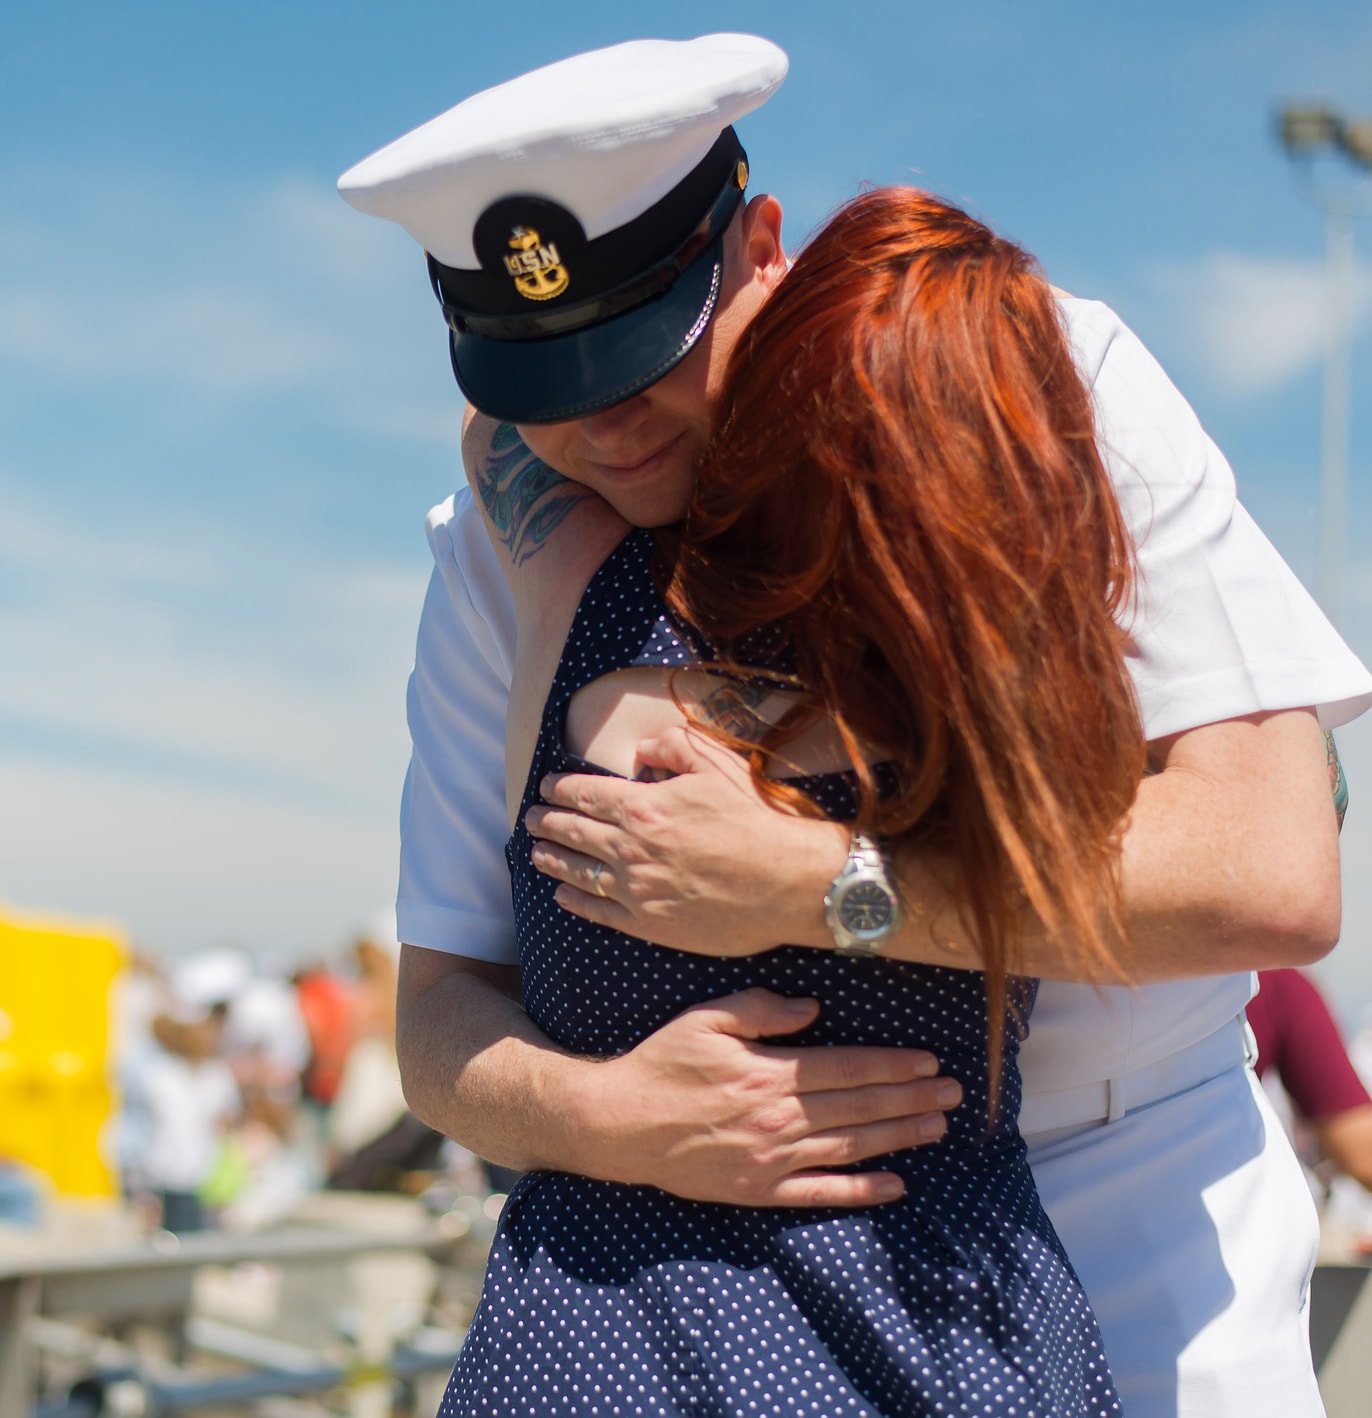 A member of the military hugging a woman